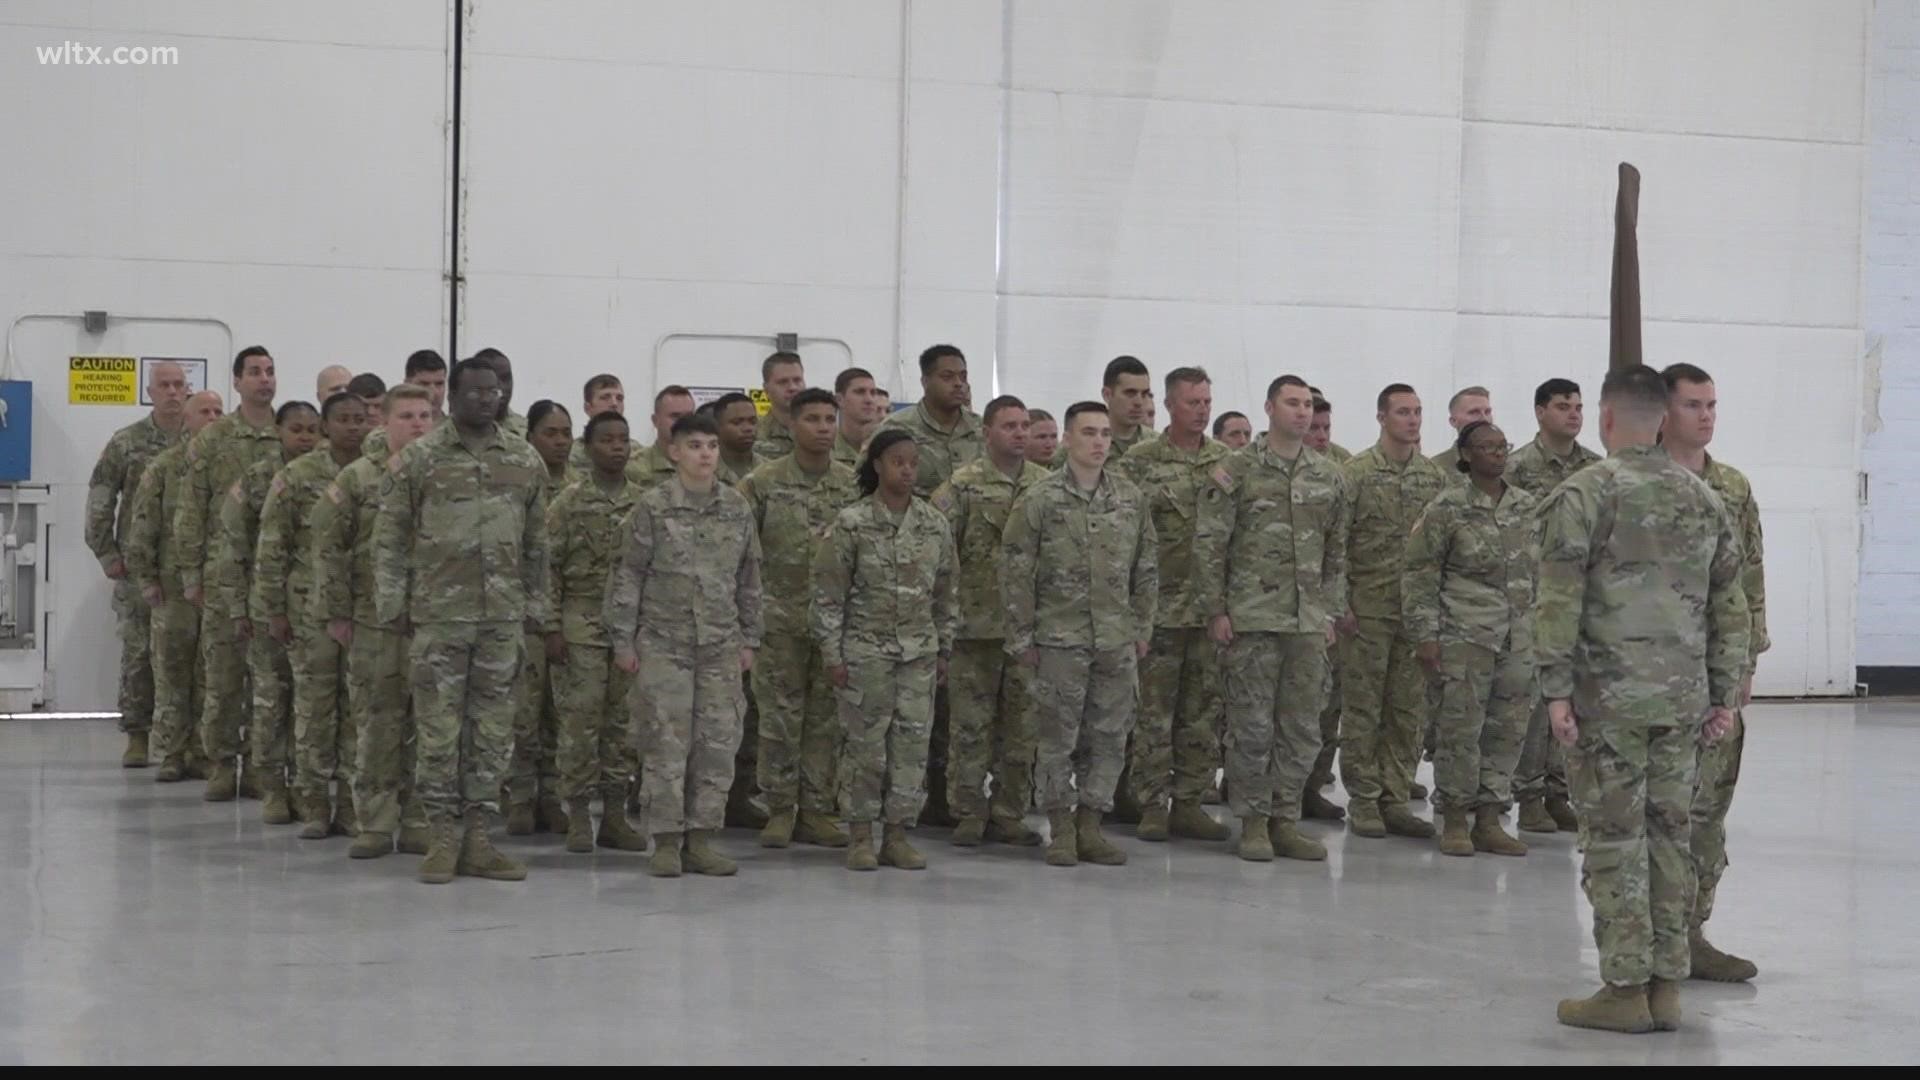 50 South Carolina Army national guard soldiers are deploying for the Sinai Peninsula this week from the McEntire base in Eastover.